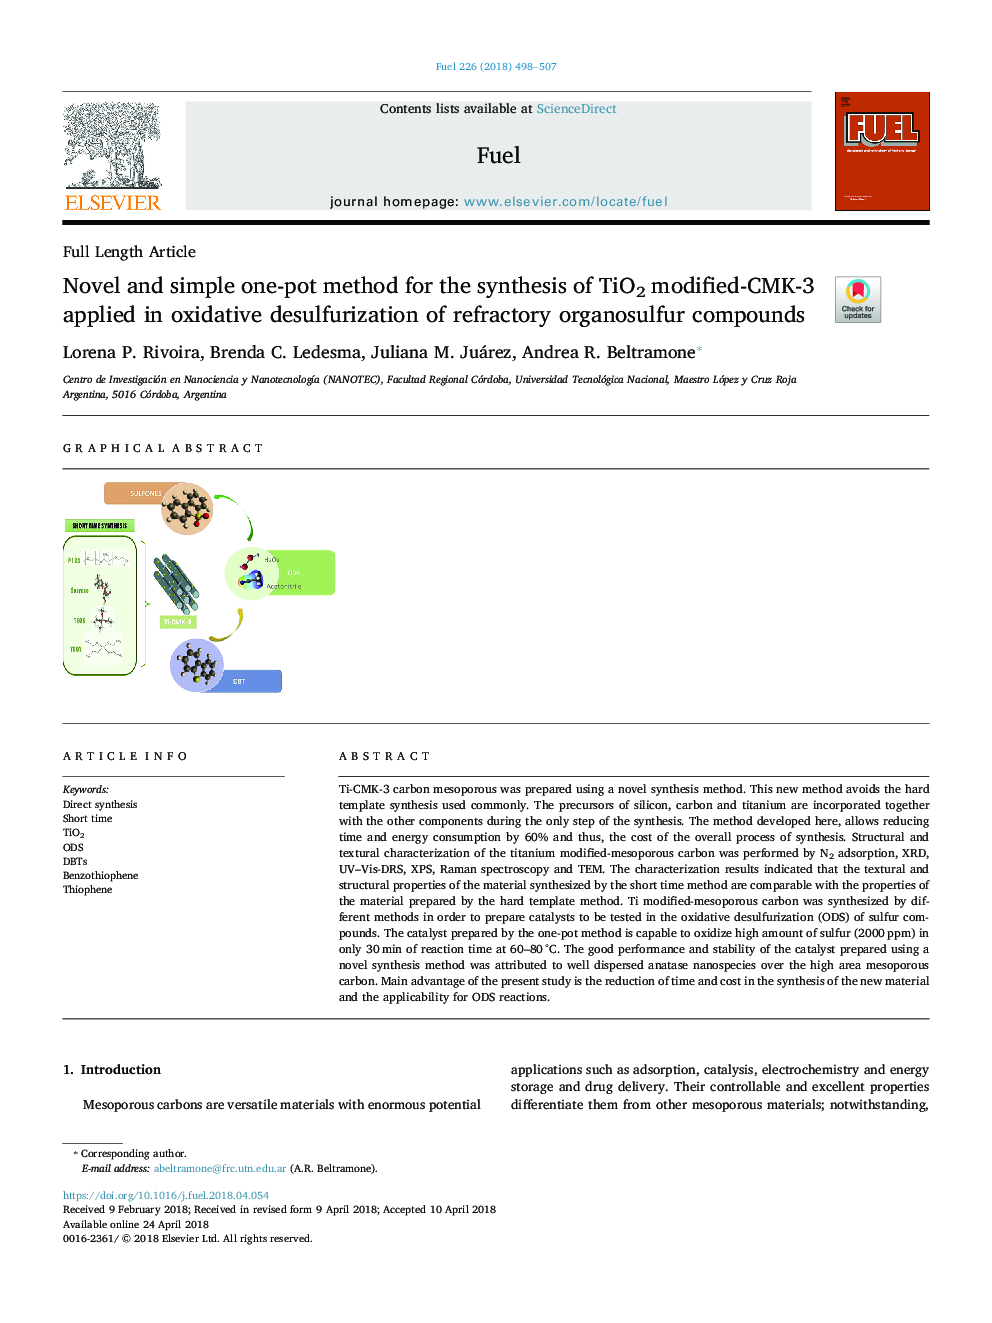 Novel and simple one-pot method for the synthesis of TiO2 modified-CMK-3 applied in oxidative desulfurization of refractory organosulfur compounds